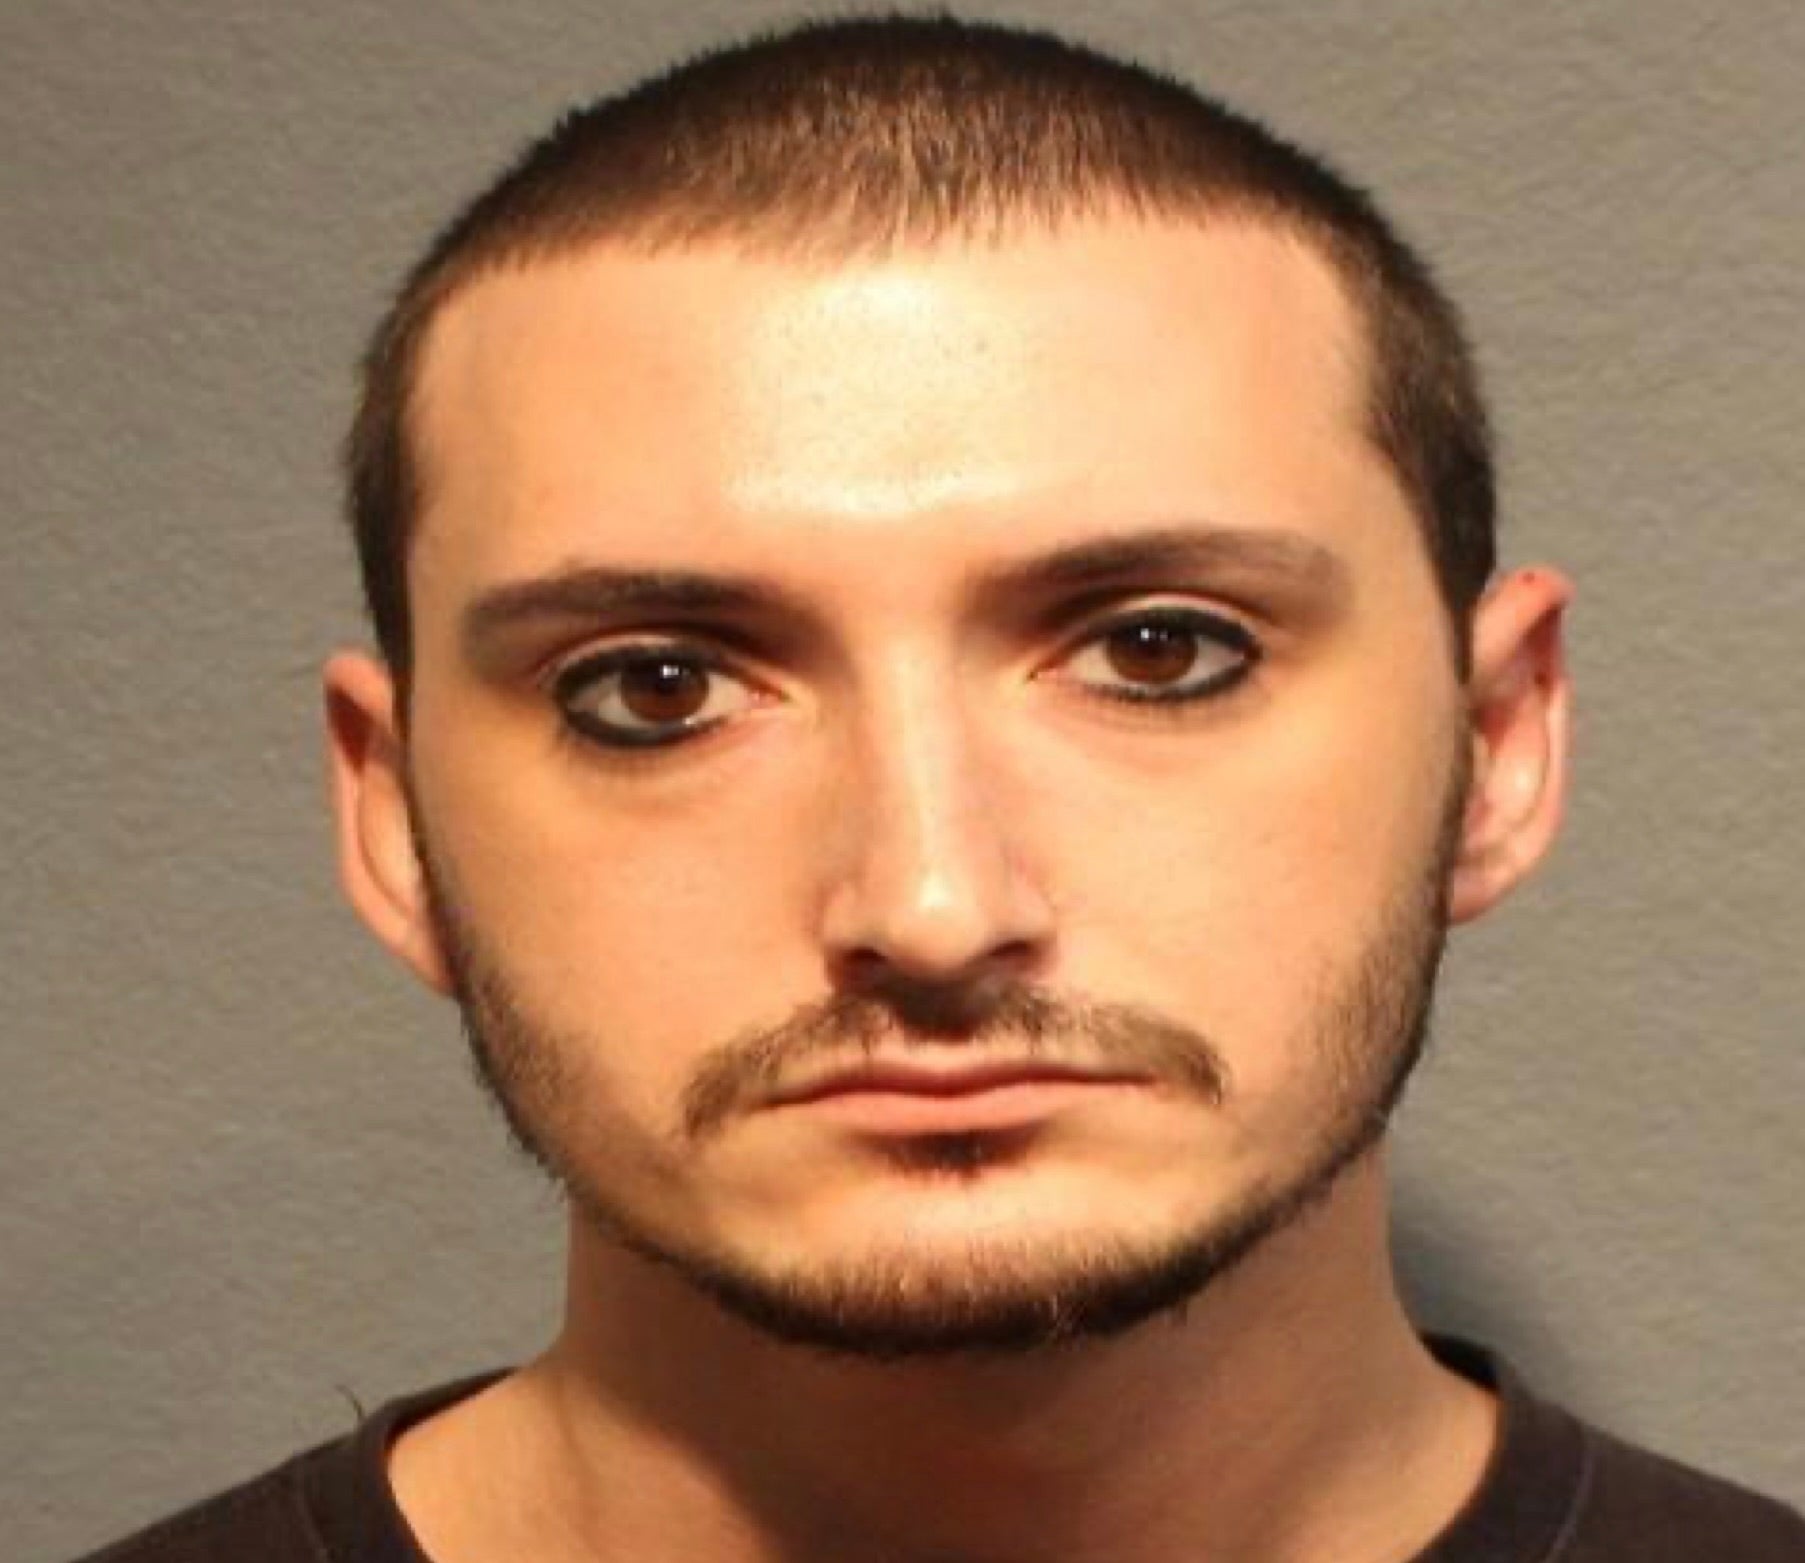 25-year-old Giovanni Impellizzari has been hit with child sex abuse image and child endangerment charges